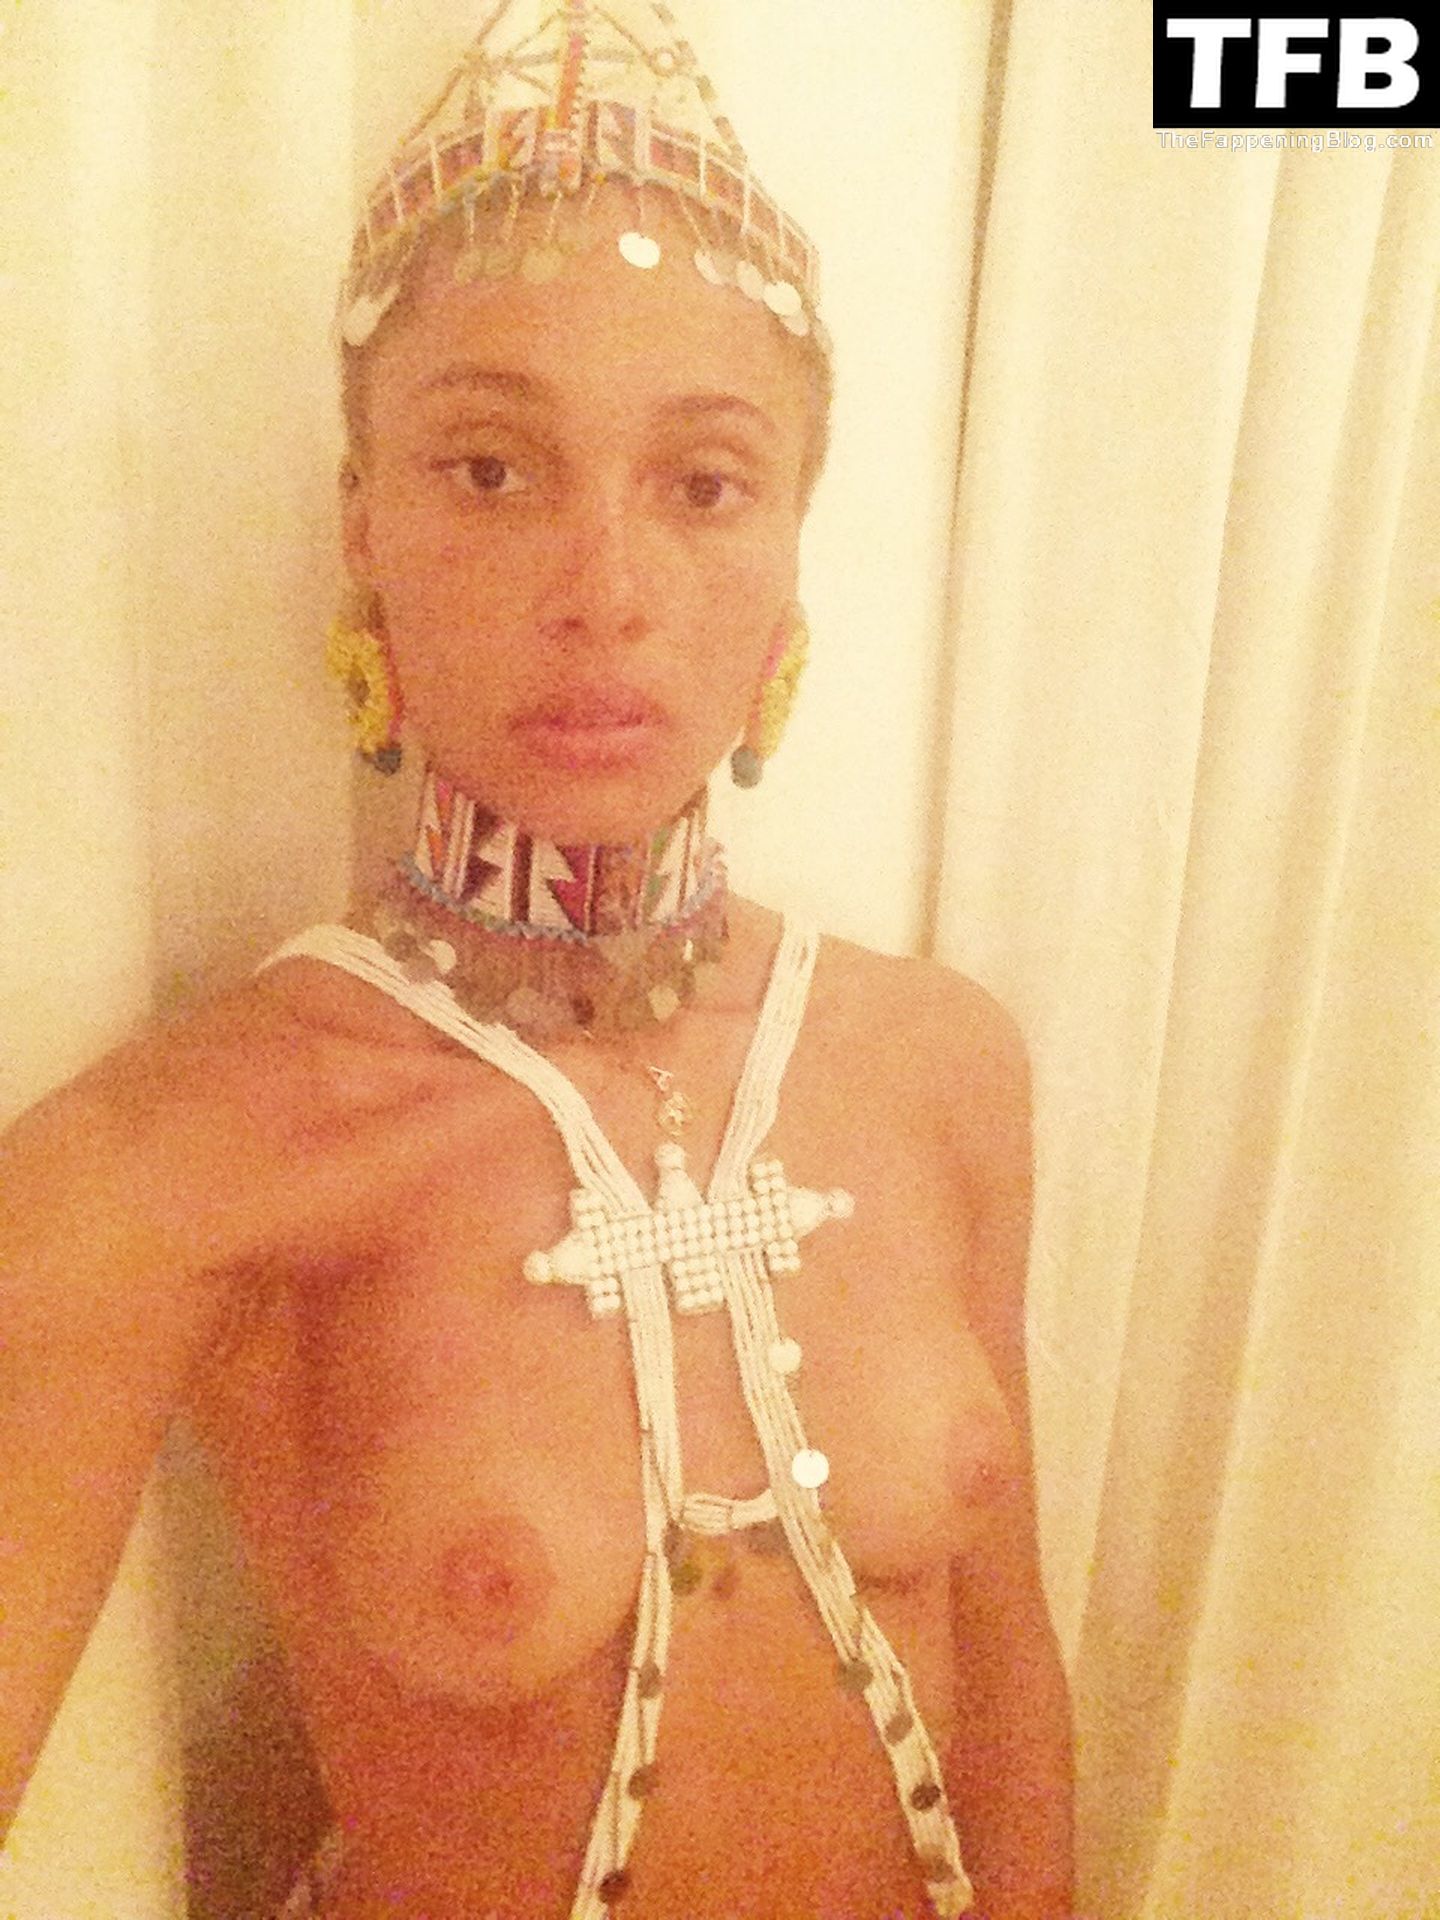 Adwoa-Aboah-Nude-Sexy-Leaked-The-Fappening-Blog-28.jpg